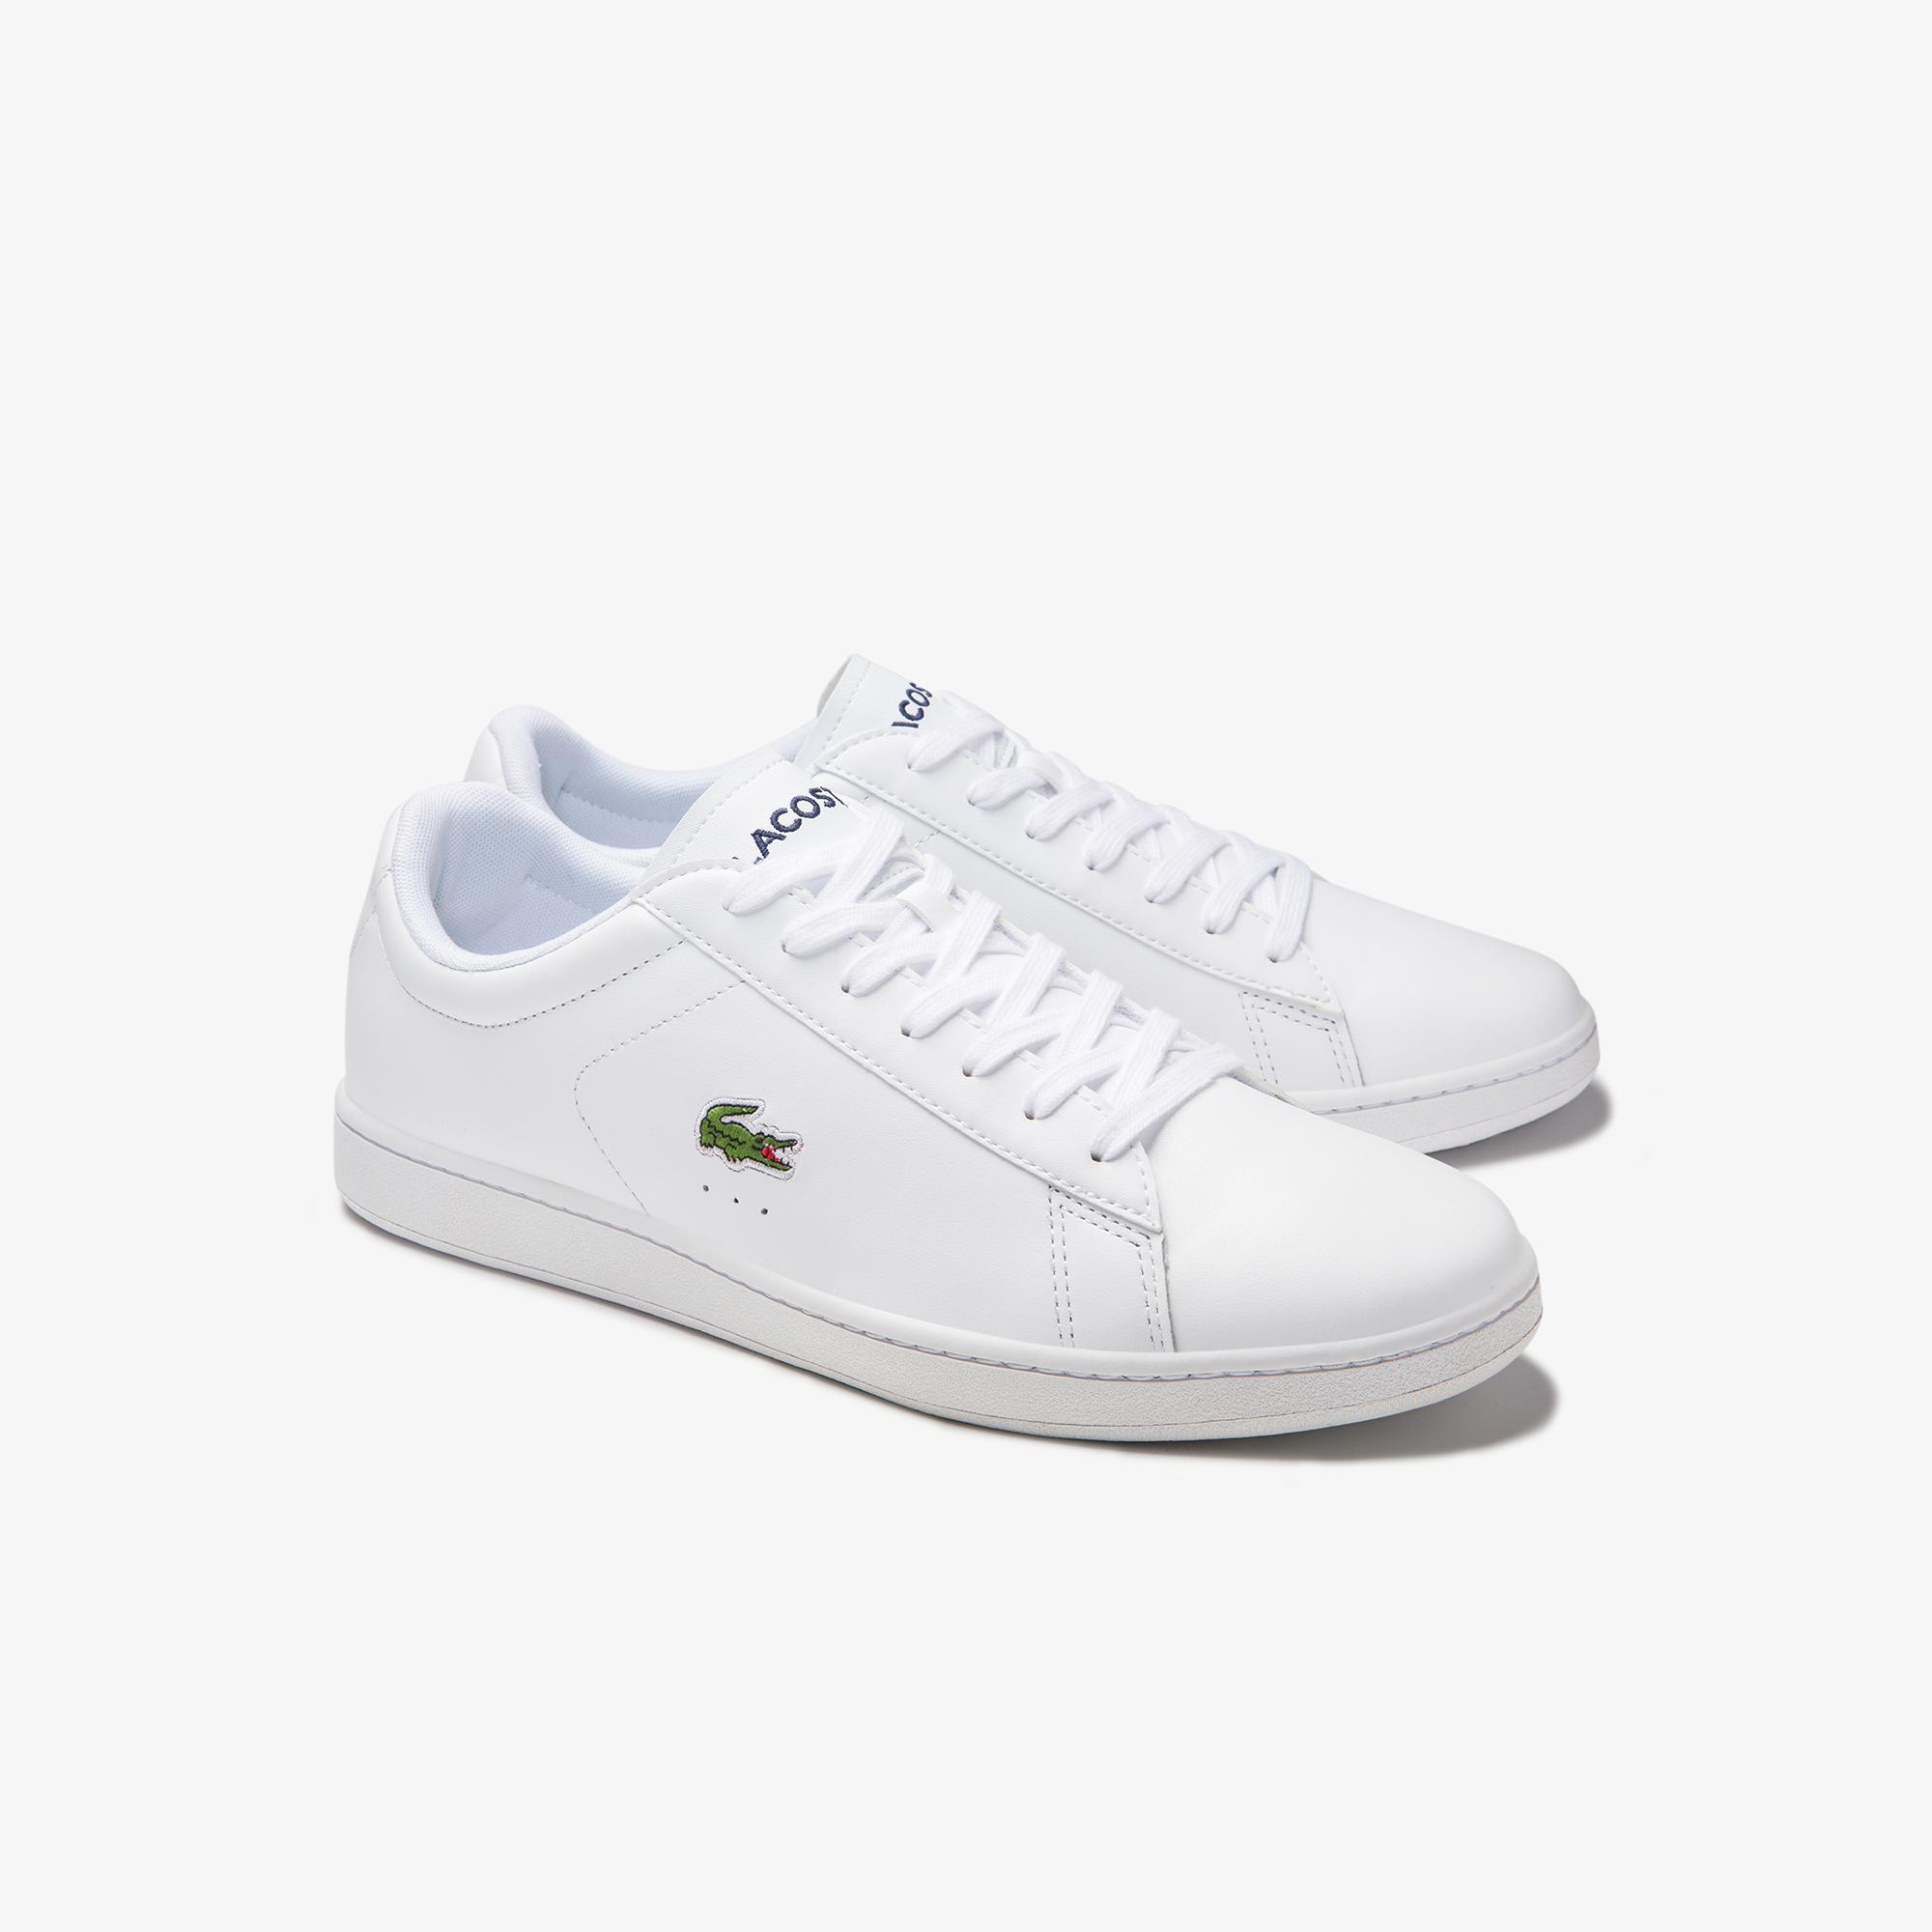 Lacoste Men's Carnaby Evo Textured 